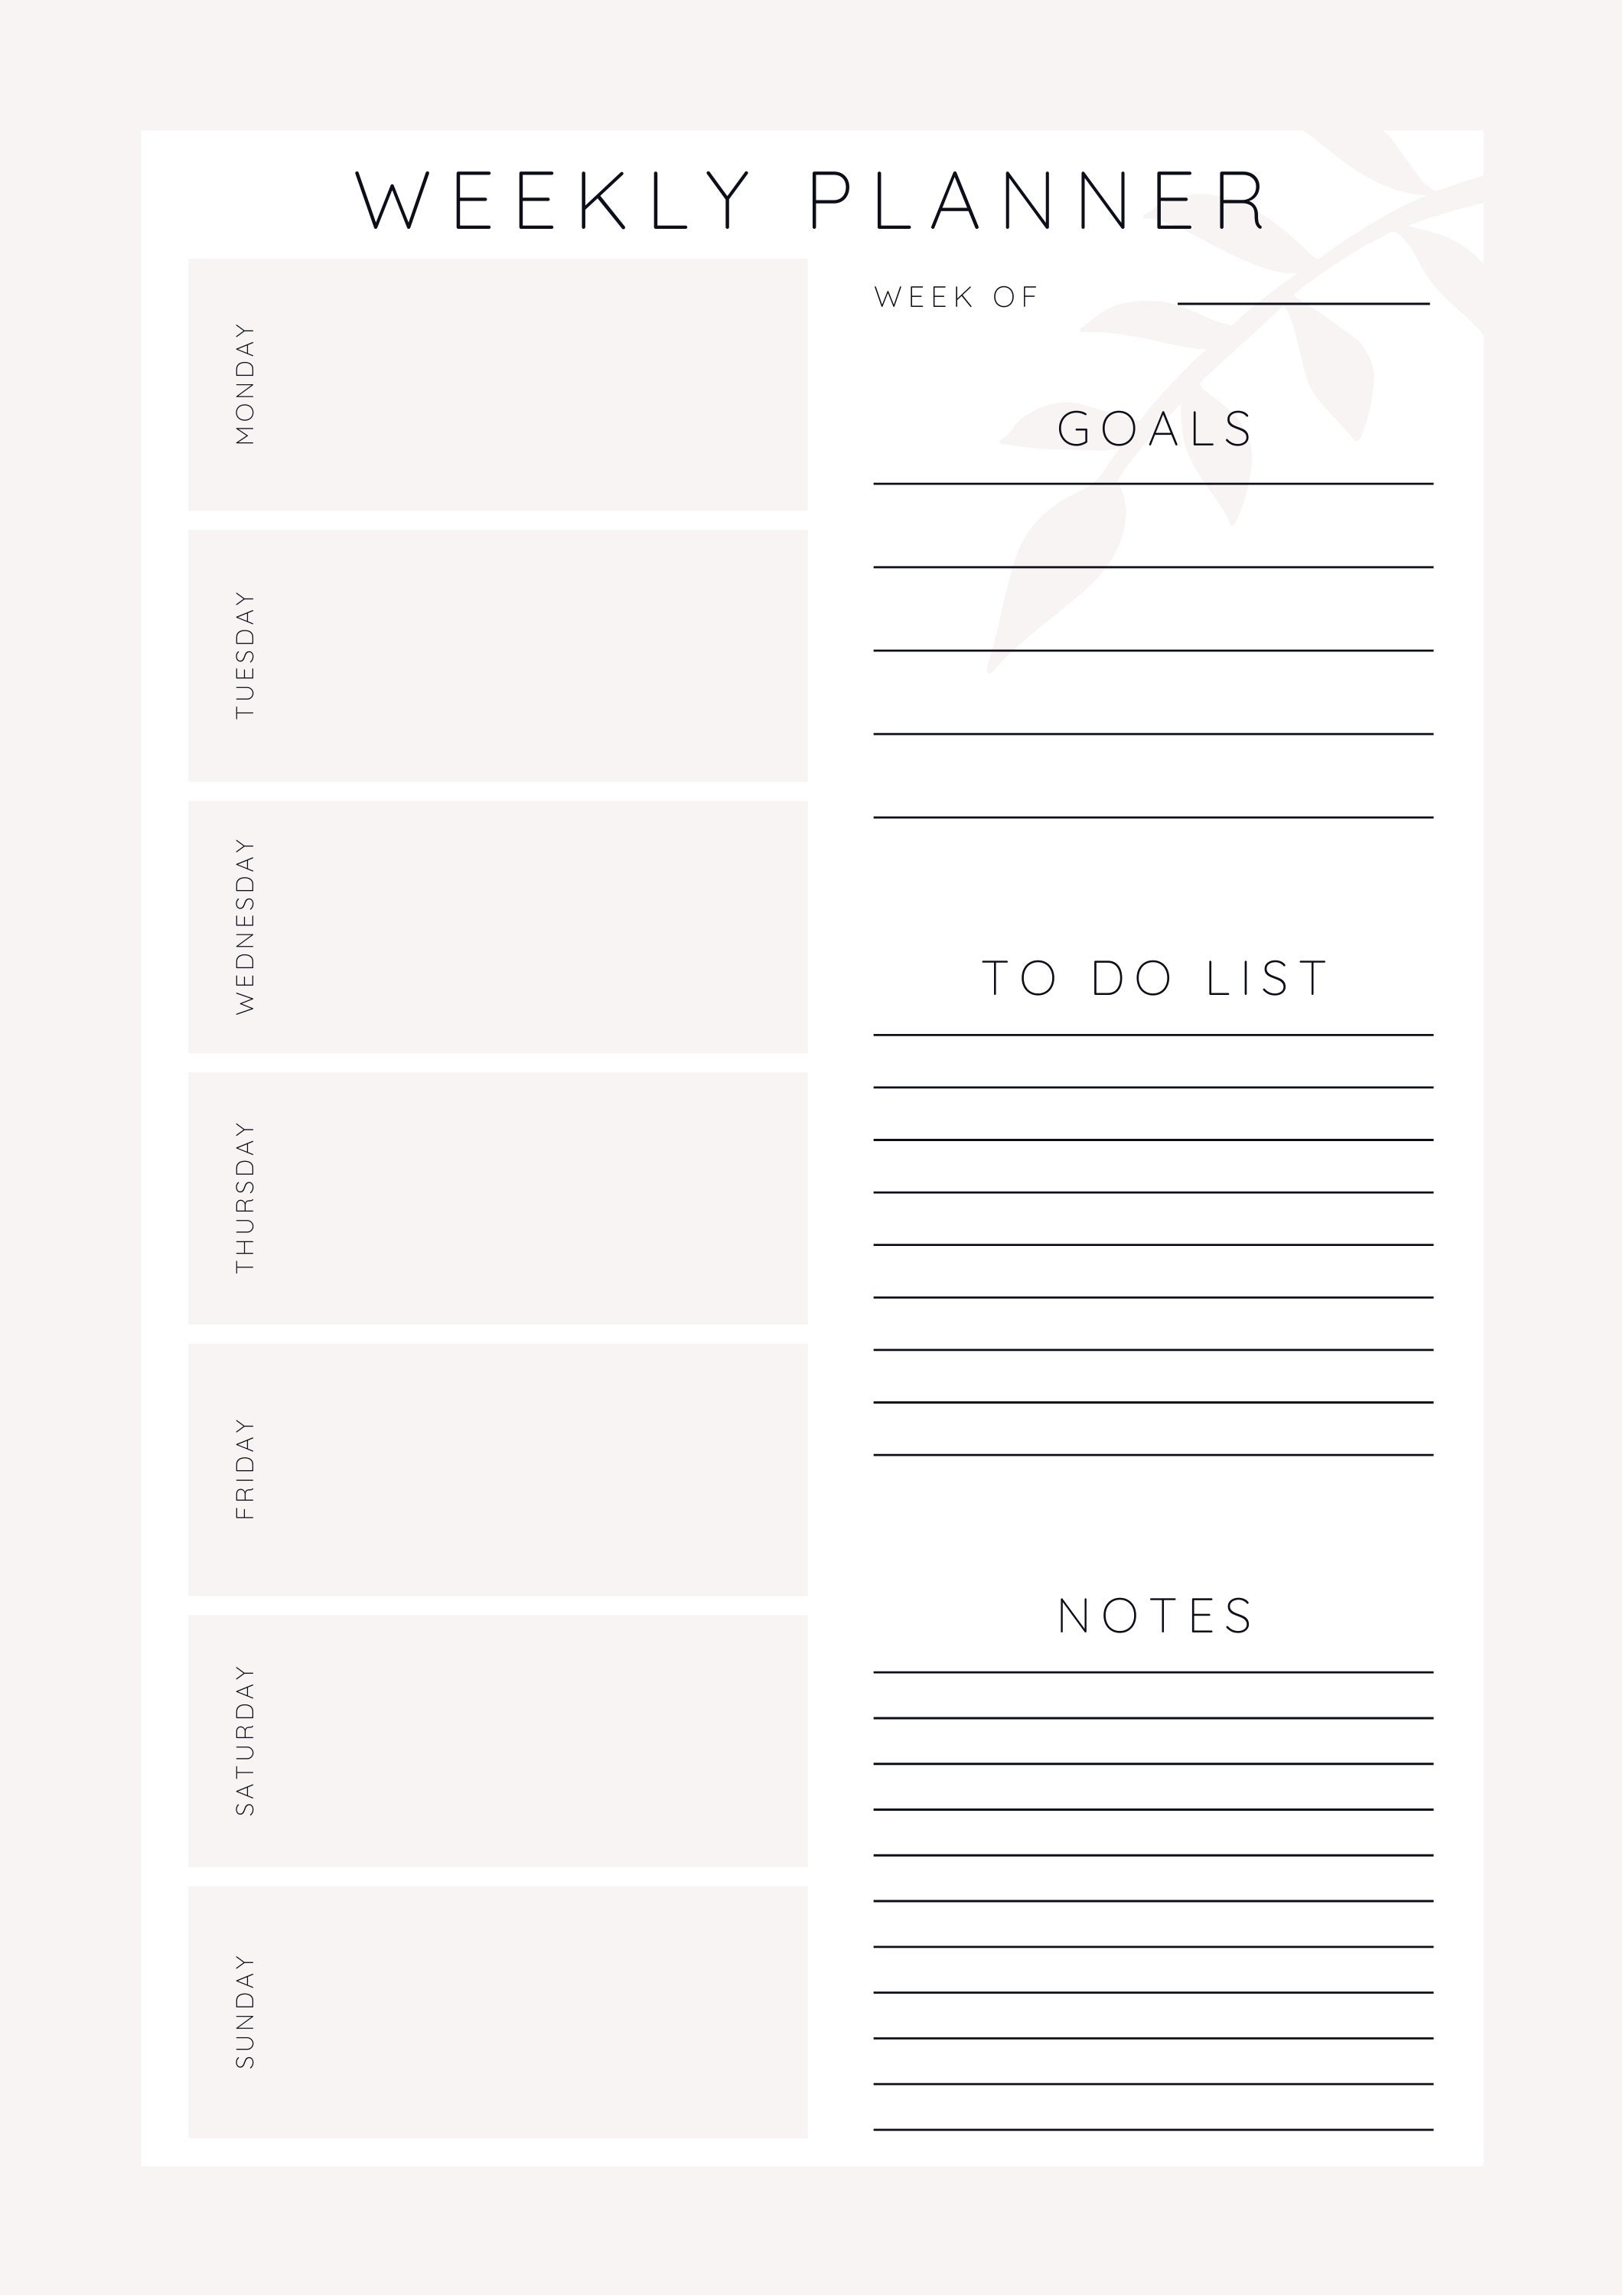 Weekly Planner Layout Goals and To Do's | Etsy